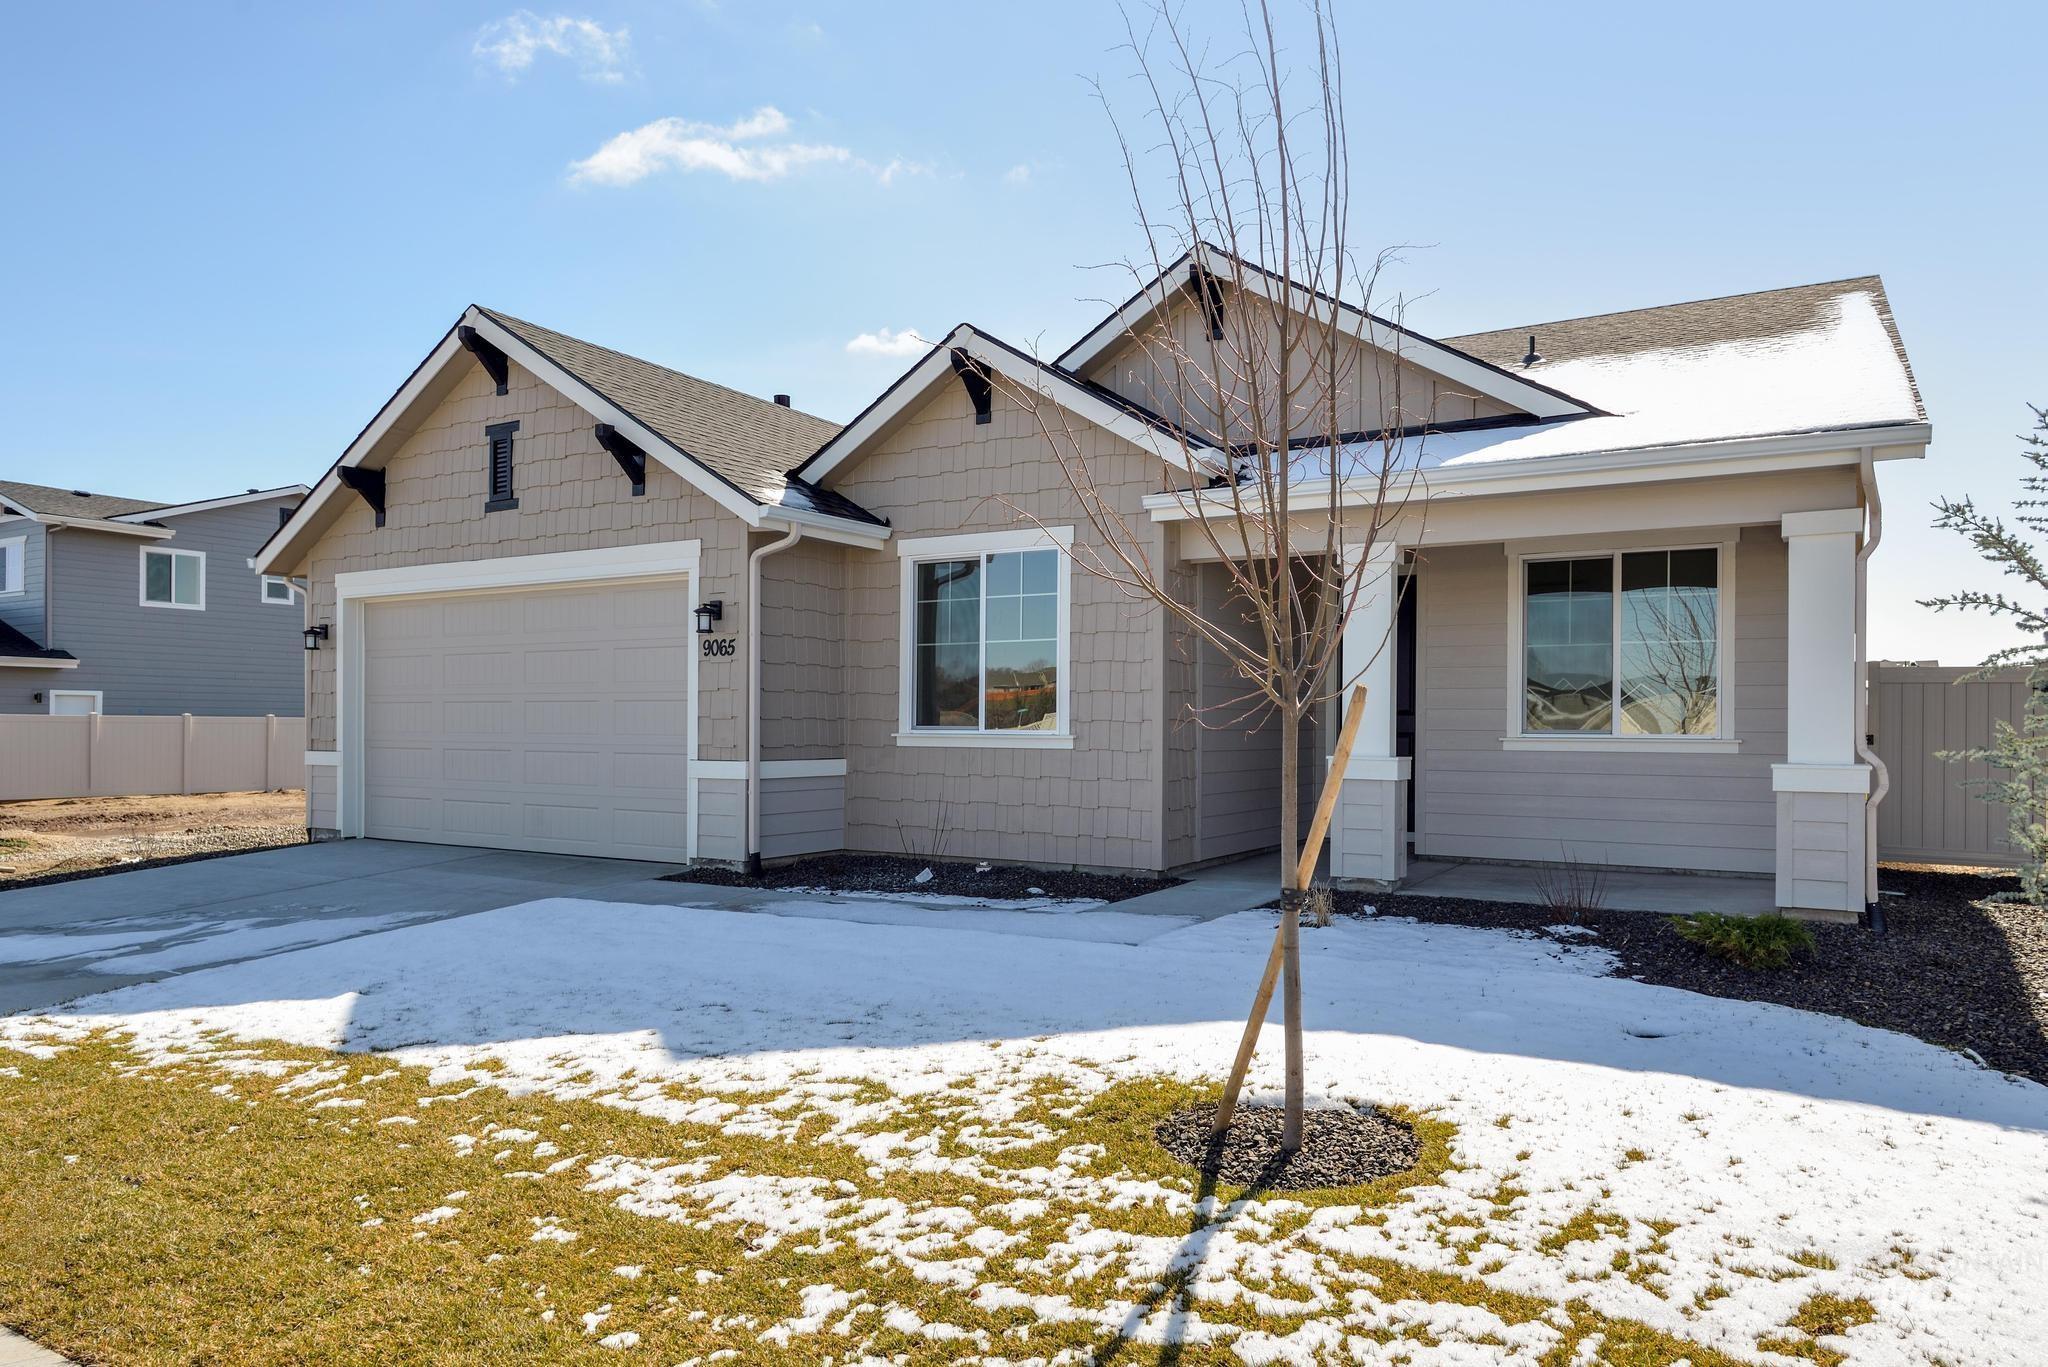 9065 W Snow Wolf Dr., Star, Idaho 83669, 3 Bedrooms, 2 Bathrooms, Residential For Sale, Price $474,995,MLS 98907342